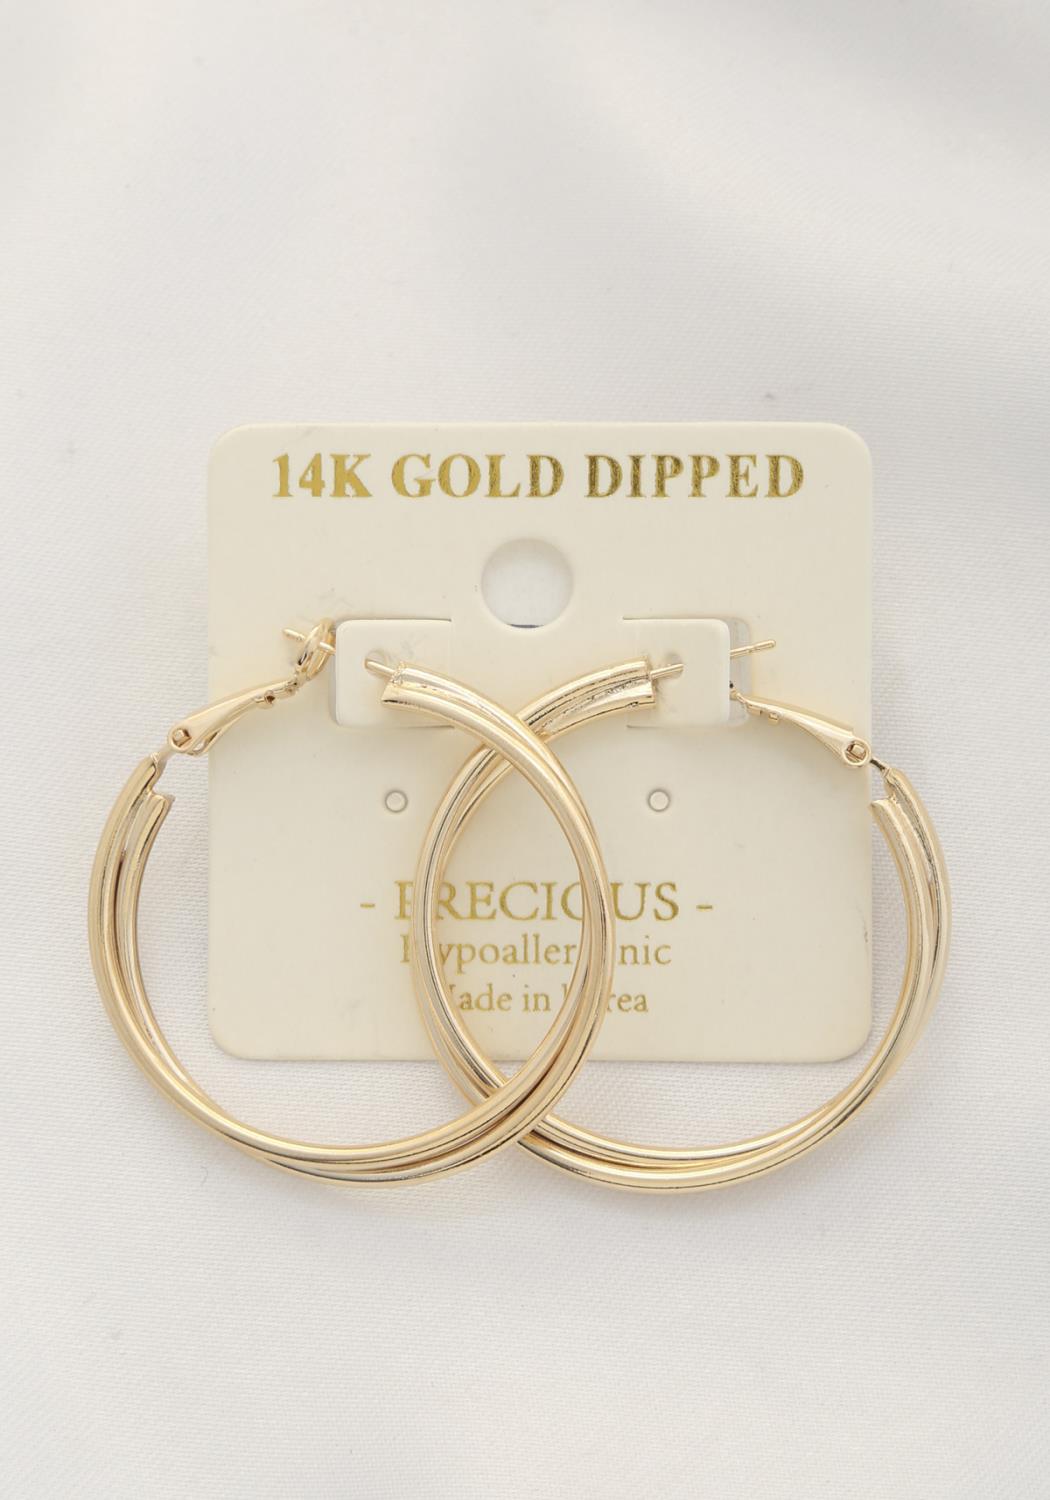 Double Hoop 14k Gold Dipped Earring - Love It Clothing